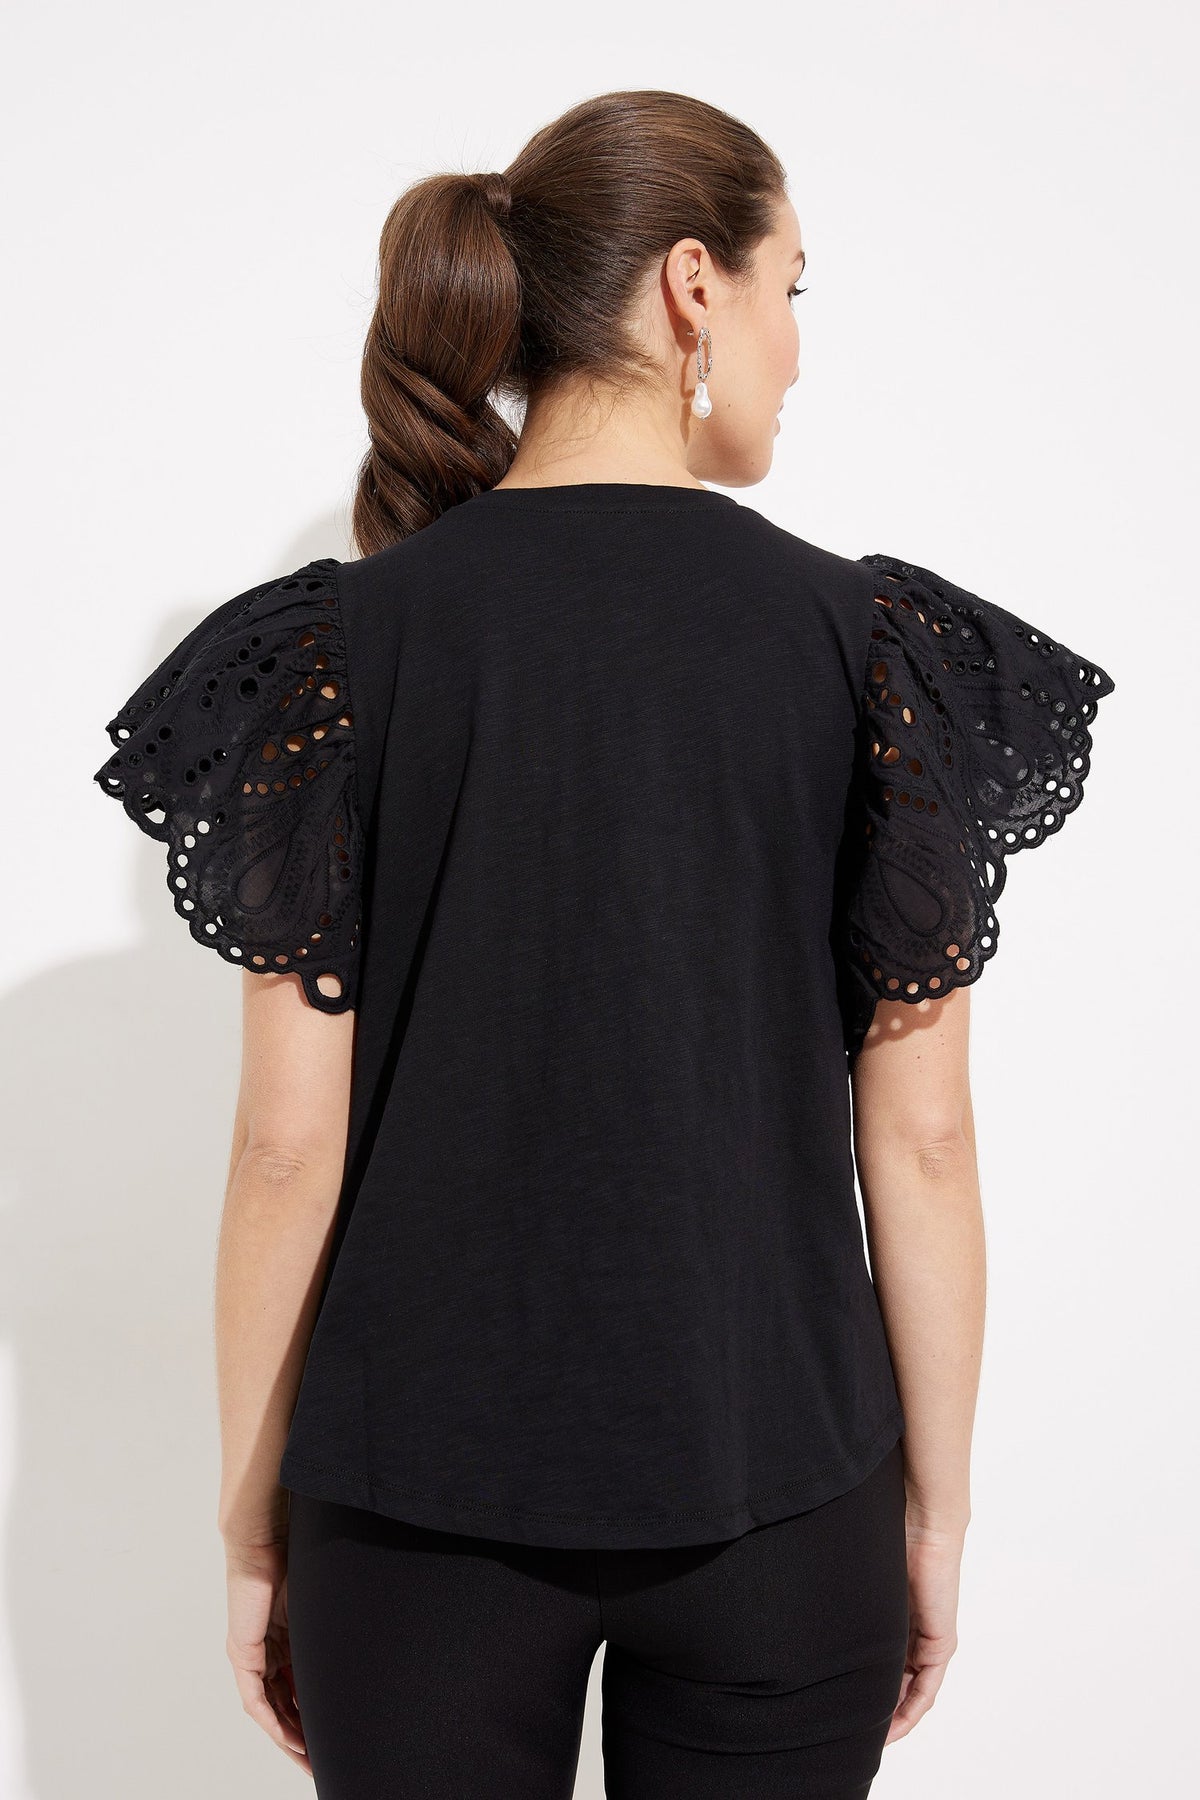 Melissa Nepton Eyelet Sleeve Top in Black - Size S Available